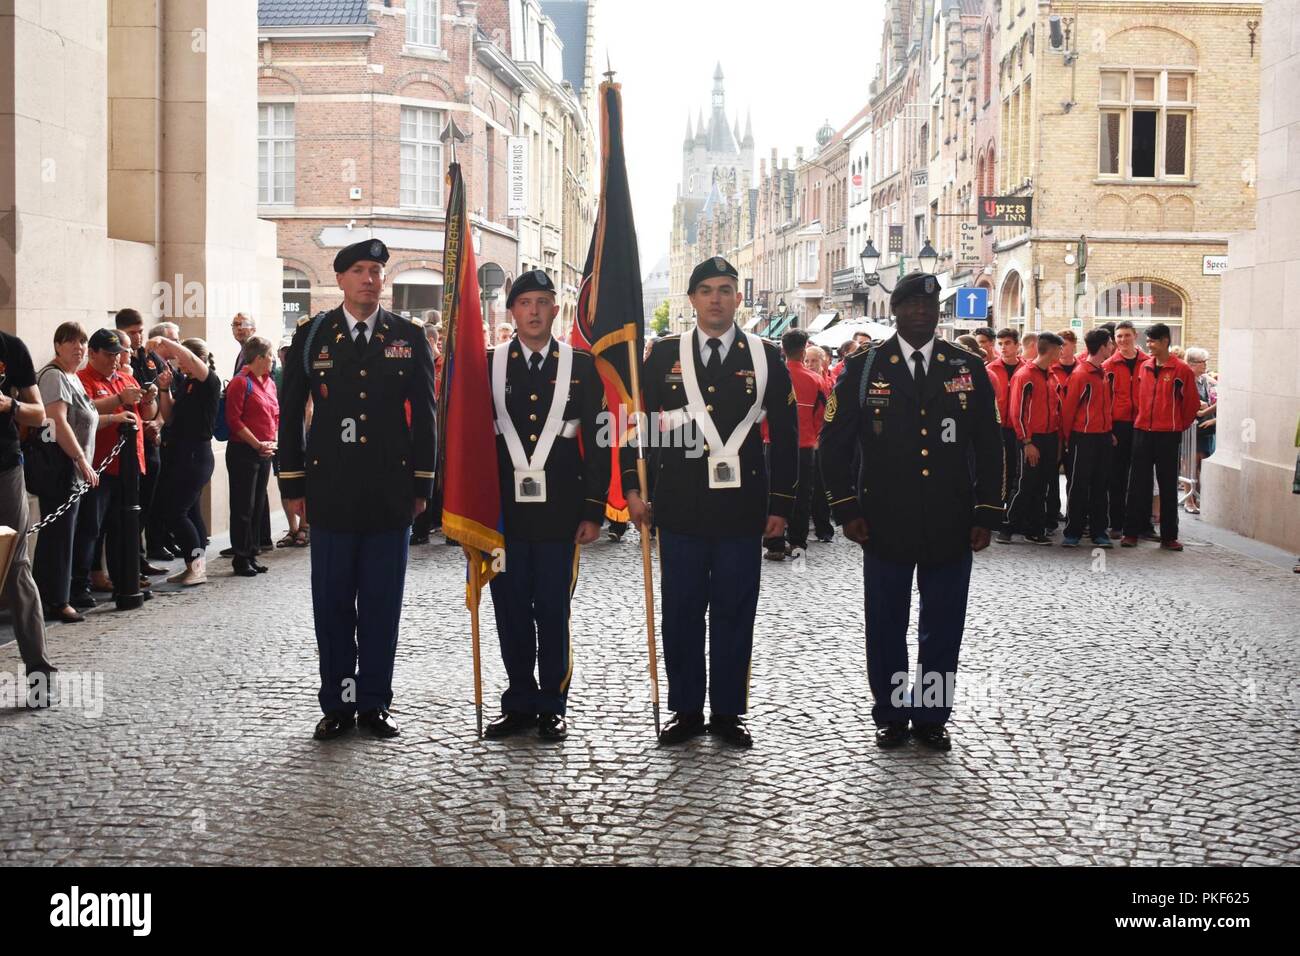 U.S. Army National Guard Soldiers from the 27th Infantry Brigade Combat Team and 30th Infantry Brigade Combat Team, take part in the Last Post Ceremony at the Menin Gate-- a British War Memorial-- in Ypres, Belgium, August 4, 2018. The Last Post Ceremony is a ceremony held every night at the Menin Gate, to honor fallen British Soldiers from World War One. (N.Y. Army National Guard Stock Photo